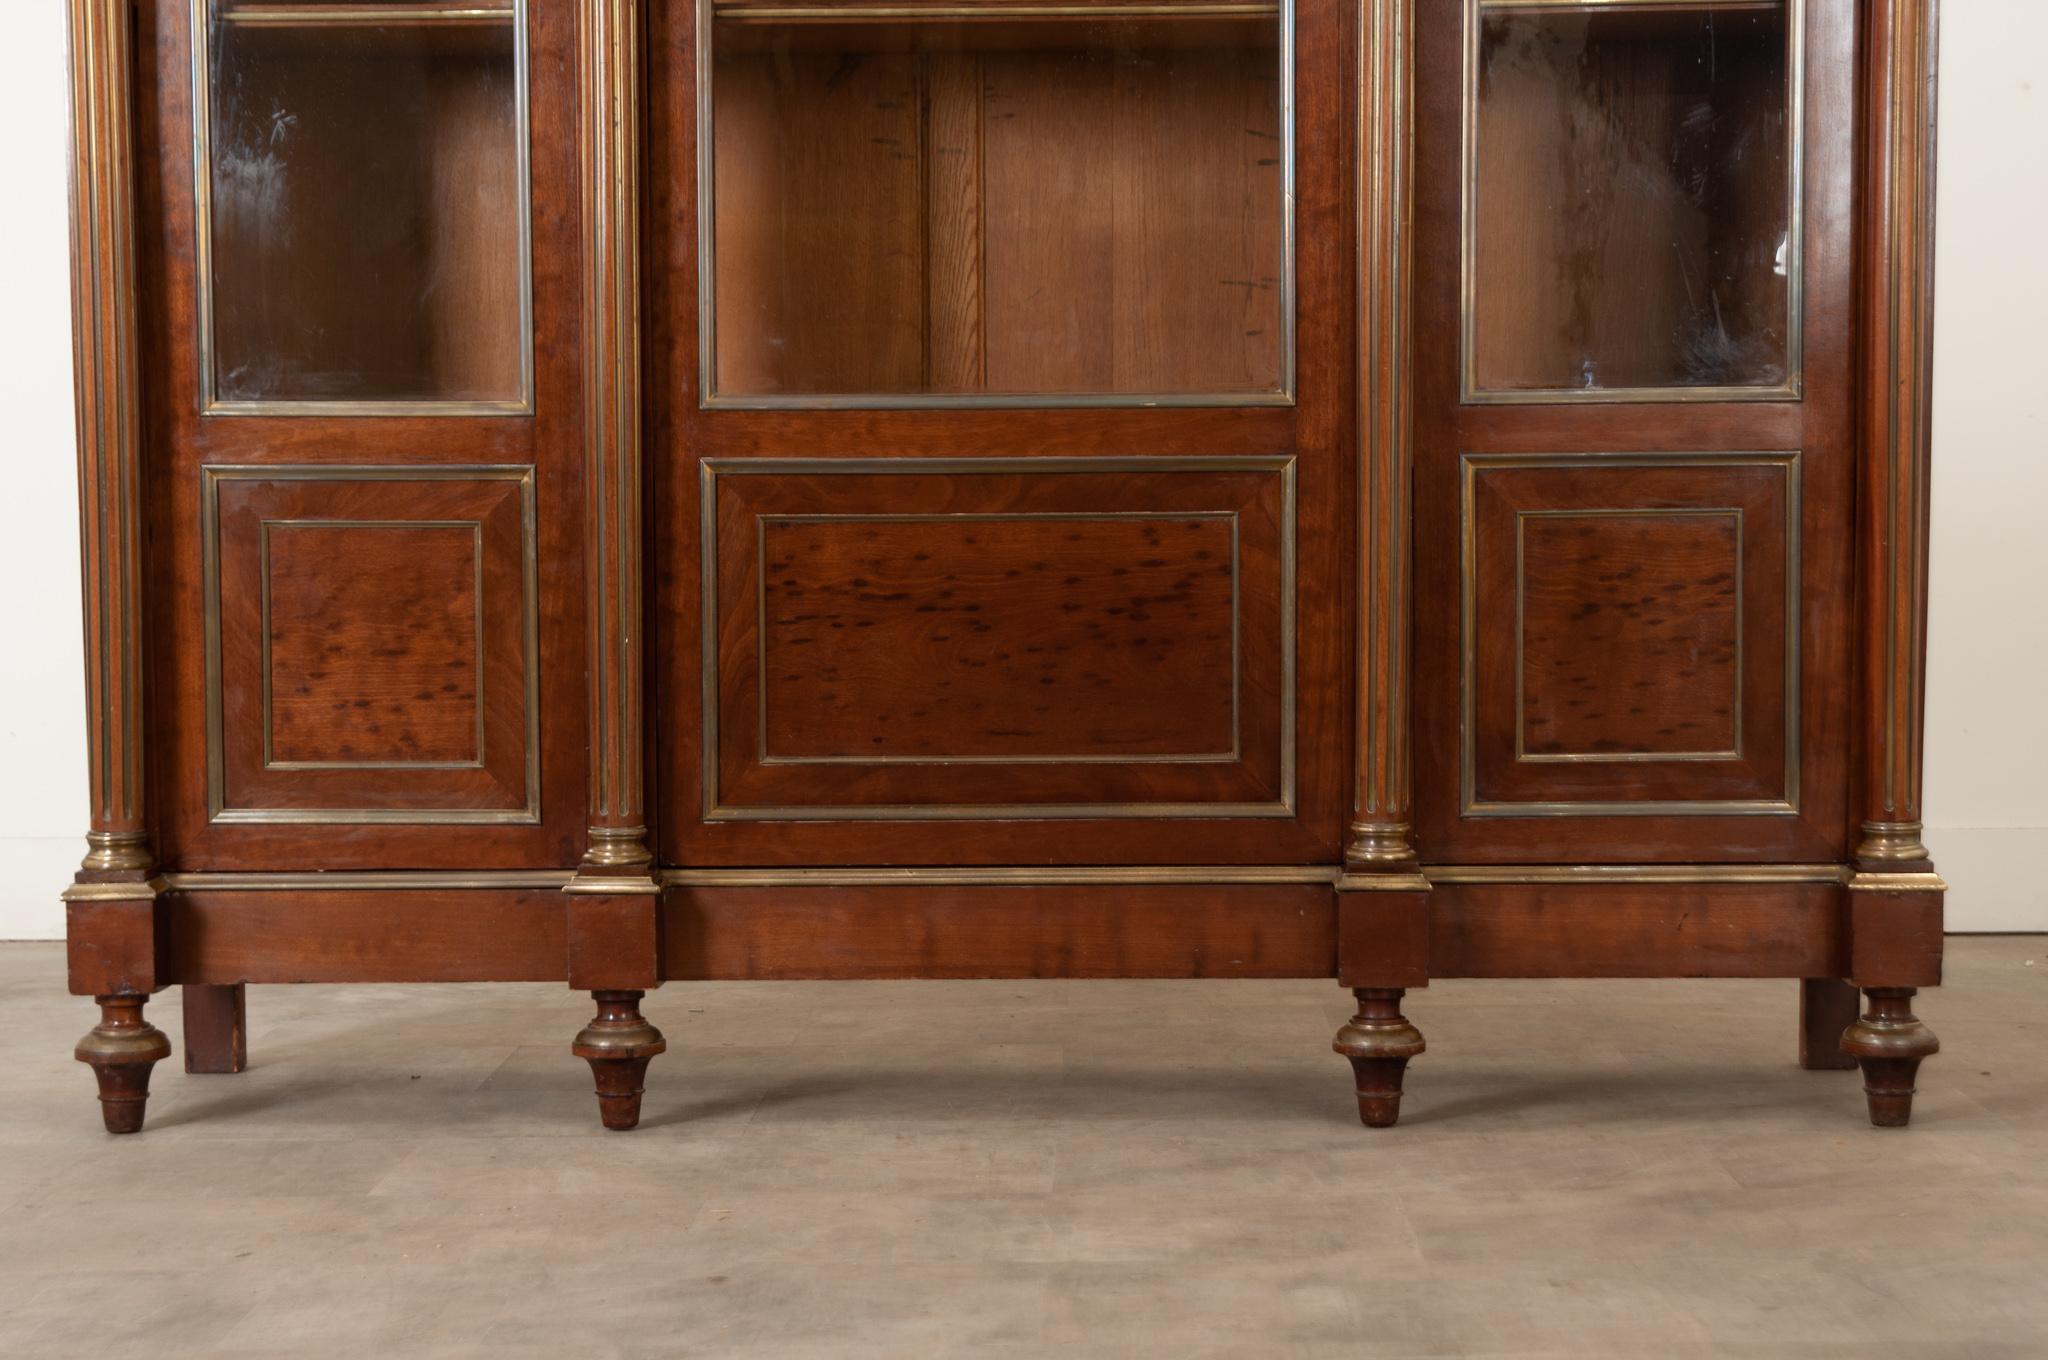 French Louis XVI Style Mahogany Bibliotheque In Good Condition For Sale In Baton Rouge, LA